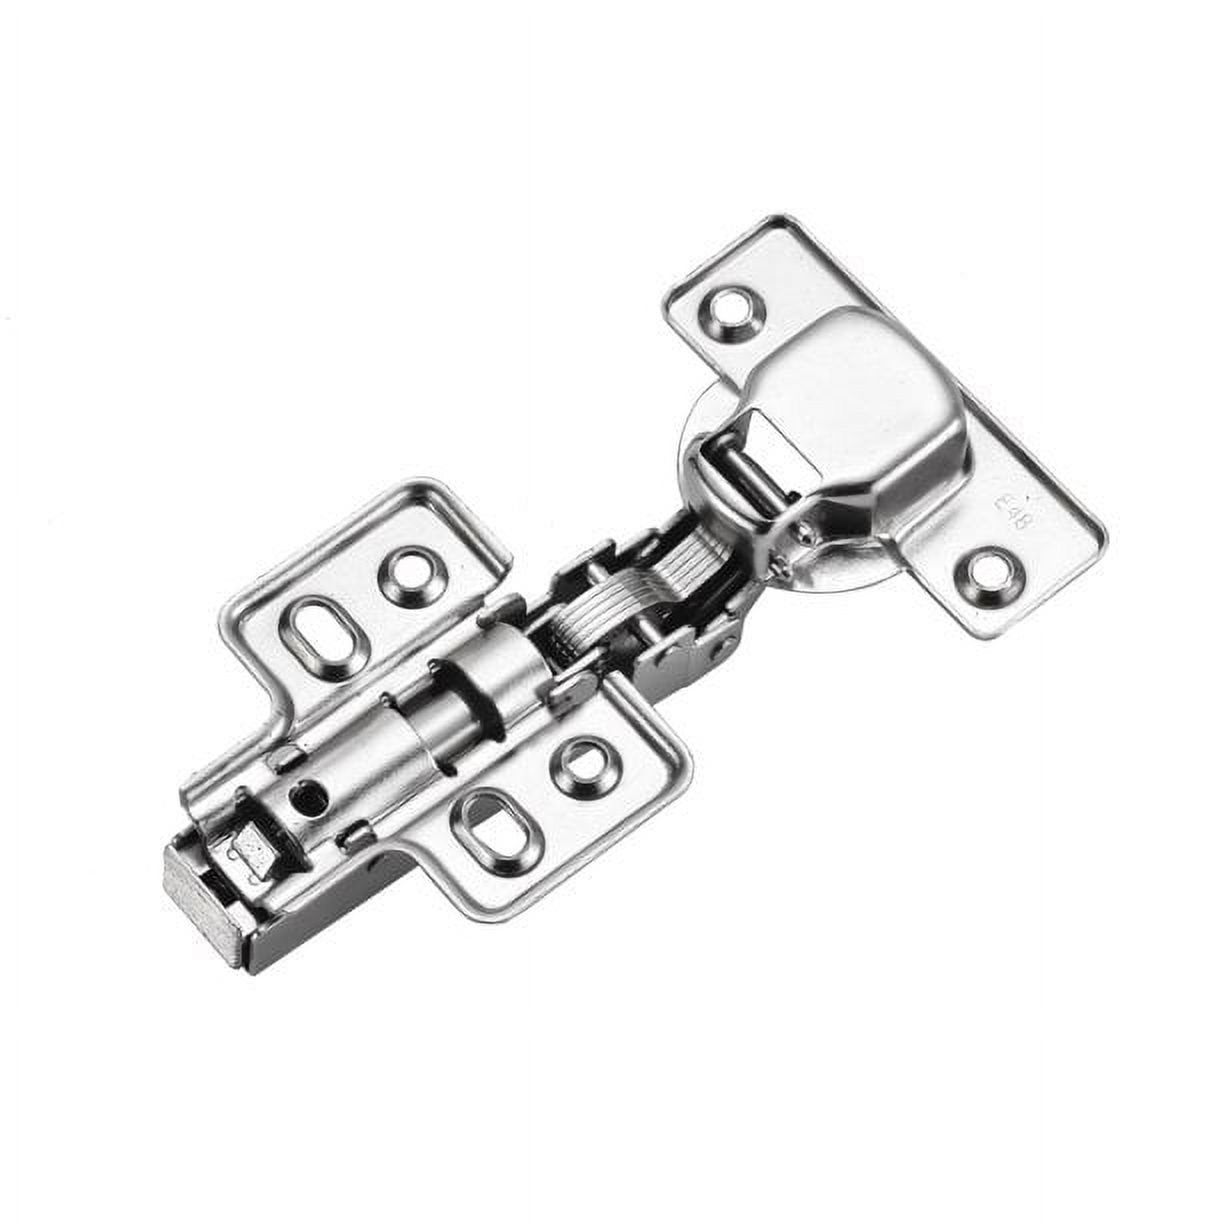 Luokim 20pcs Standard Cabinet Hinge,Fit for Frameless Cabinet,European Full Overlay,Soft Closing,Four-Hole mounting Plate Hinges,Nickel Plated Finish - image 4 of 7